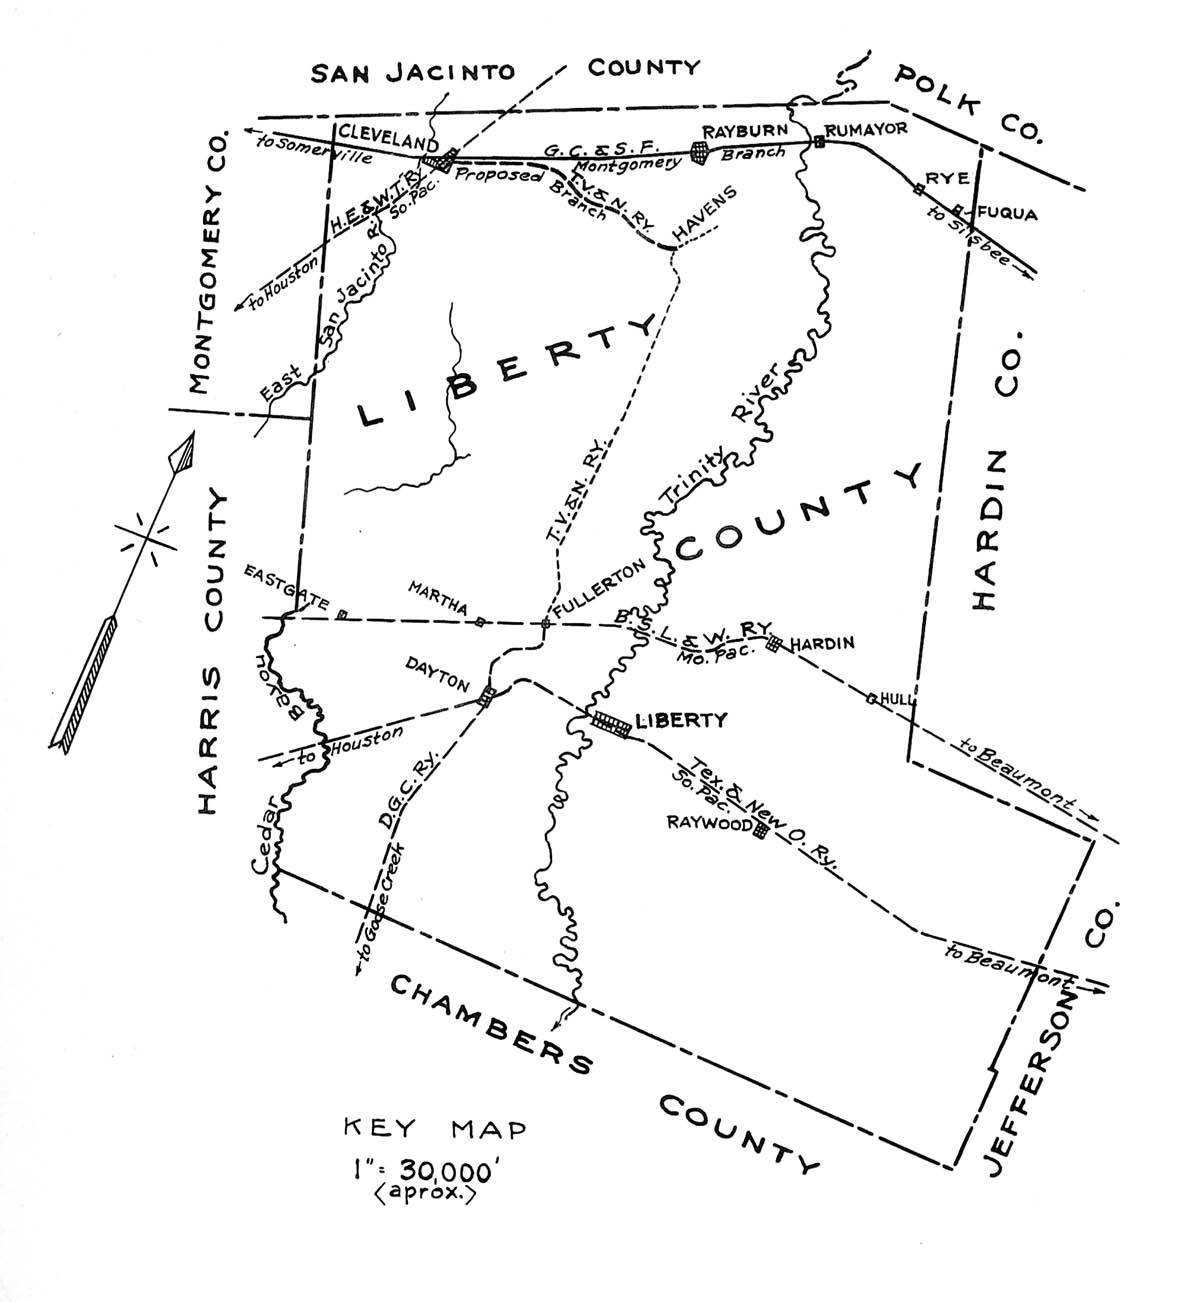 Trinity Valley & Northern Railway Company (Tex.), showing existing, abandoned and proposed lines in 1930.